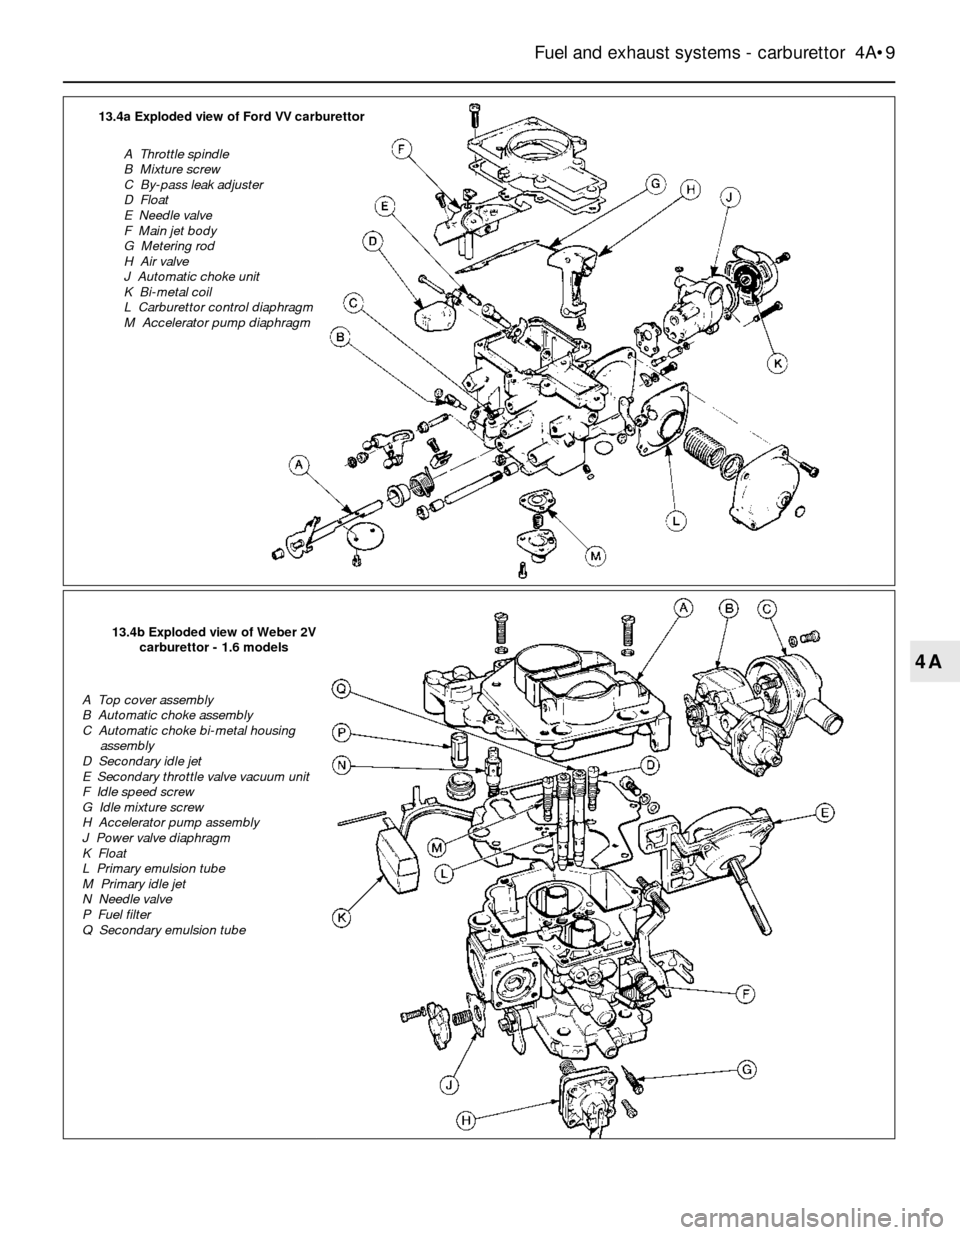 FORD SIERRA 1992 2.G Fuel And Exhaust Systems Carburettor Workshop Manual Fuel and exhaust systems - carburettor  4A•9
4A
13.4a Exploded view of Ford VV carburettor
A  Throttle spindle
B  Mixture screw
C  By-pass leak adjuster
D  Float
E  Needle valve
F  Main jet body
G  